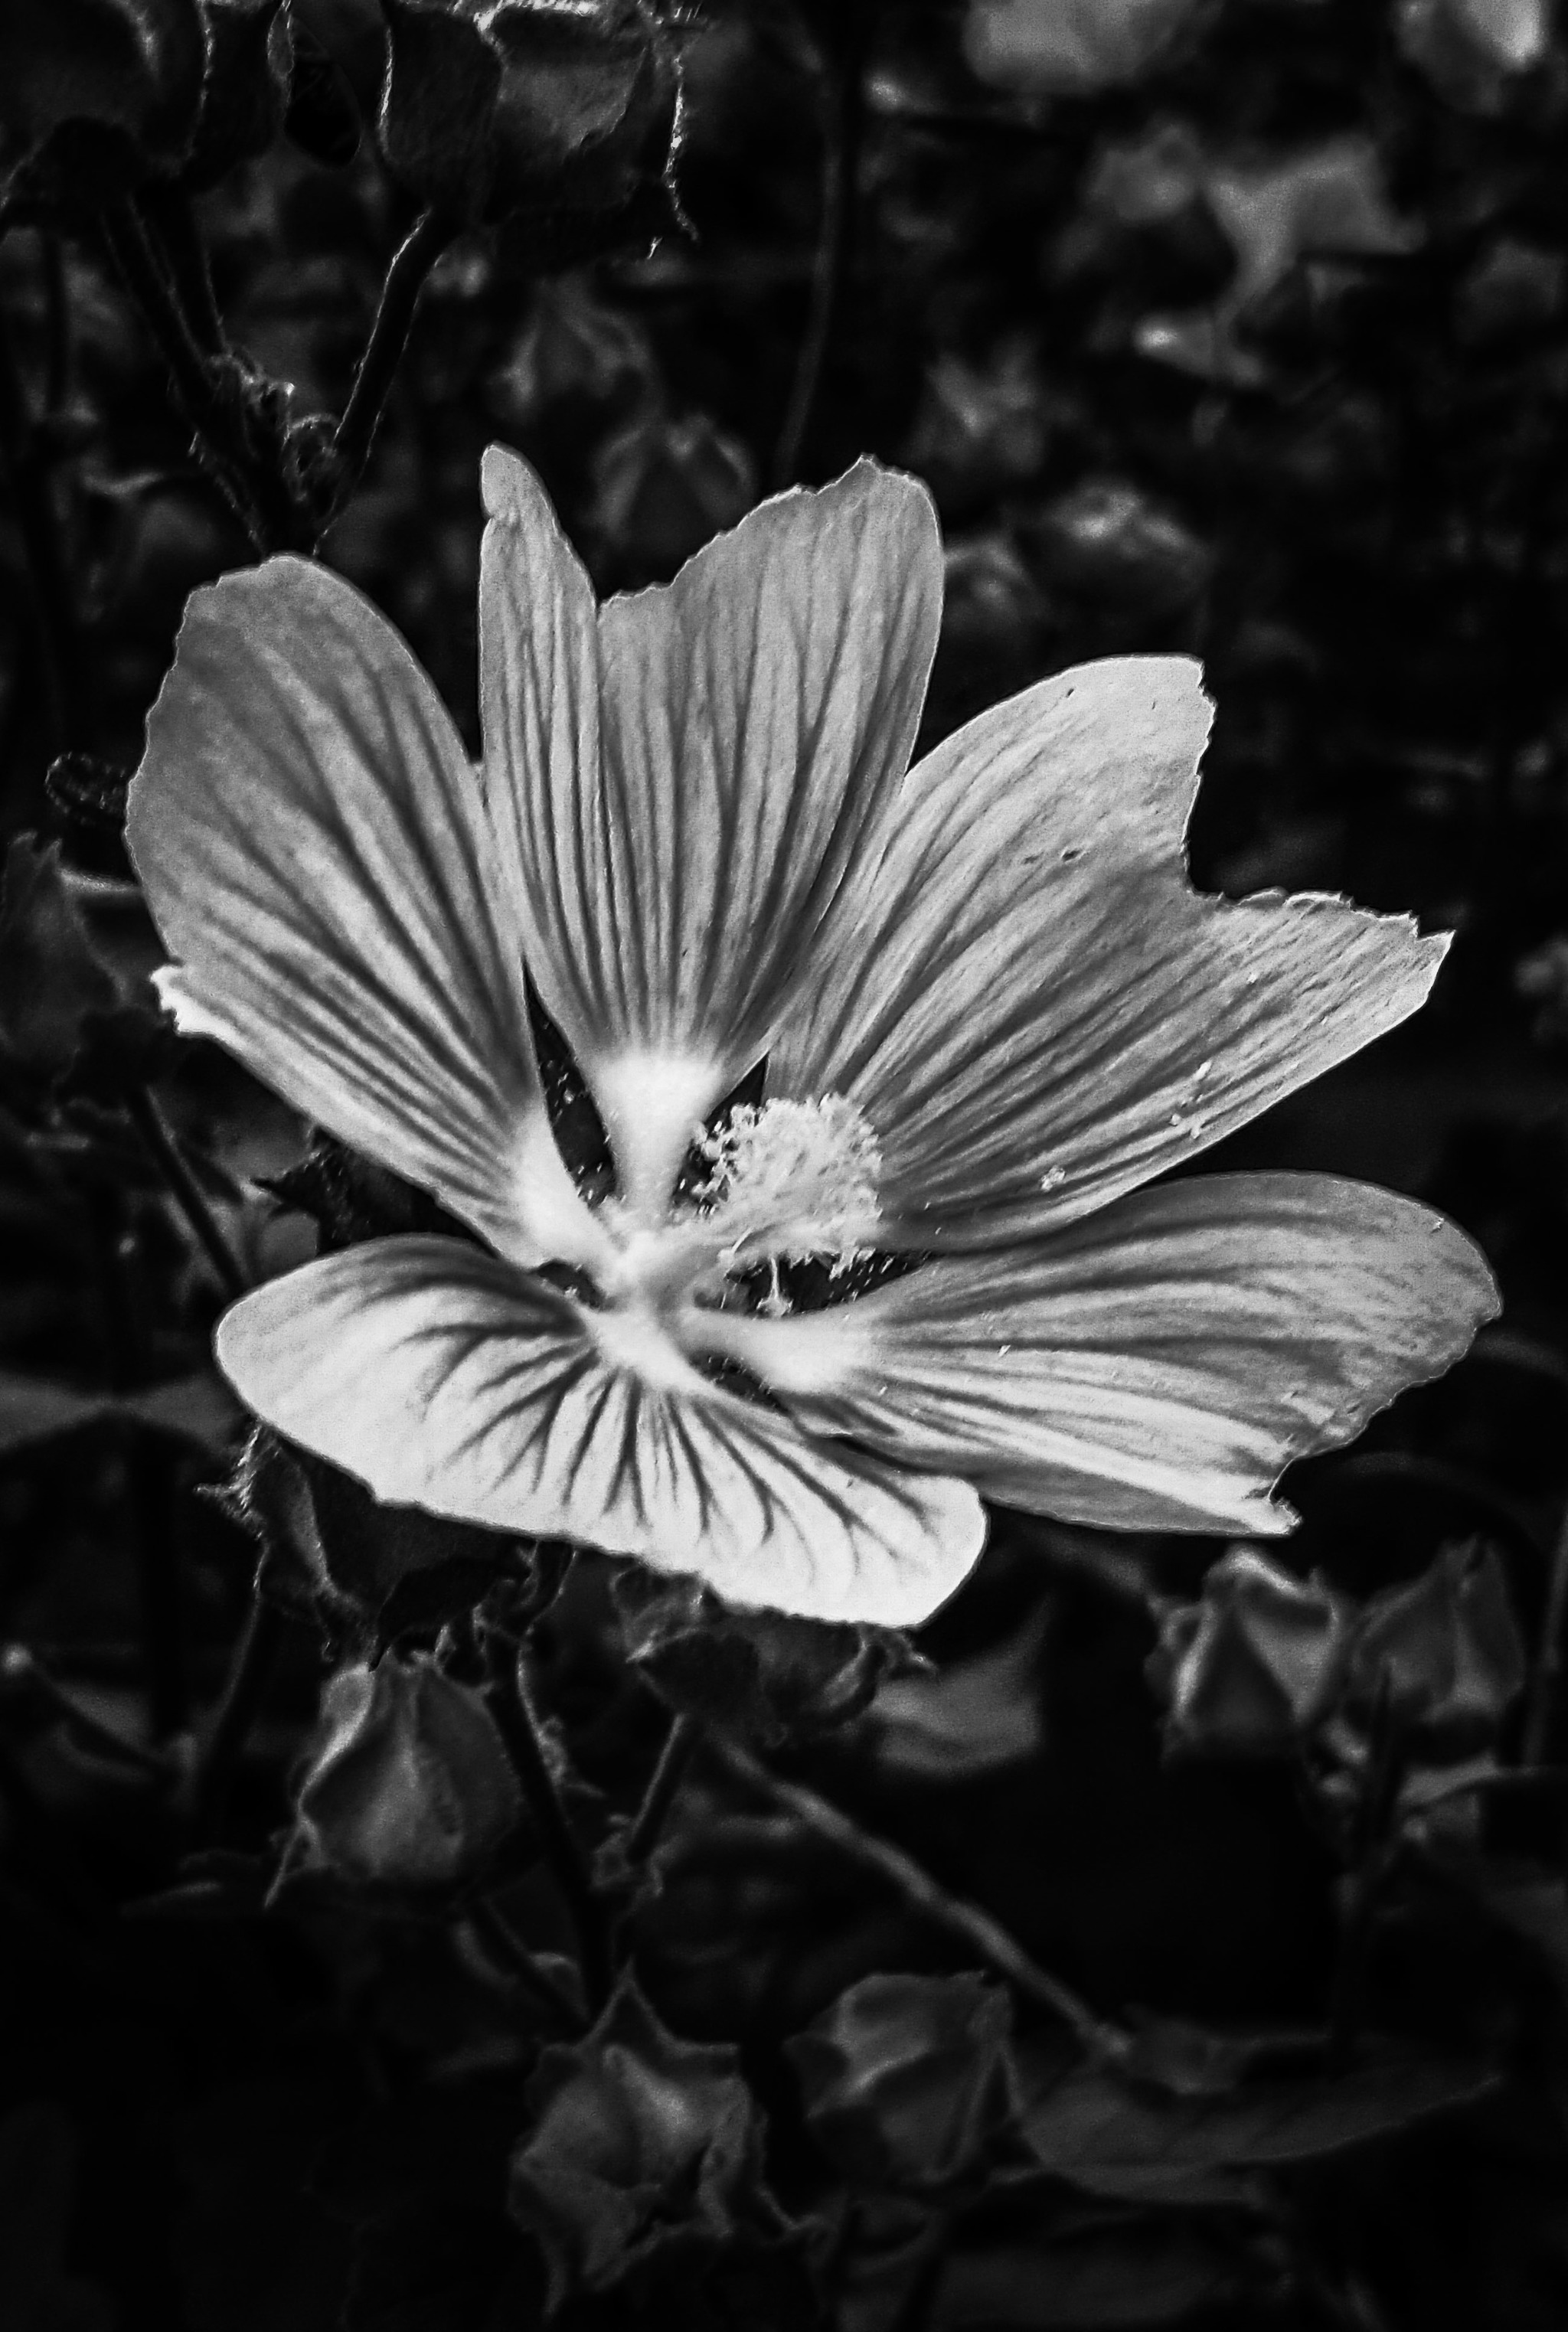 Black and white version - Longpost, Flowers, Image editing, Black and white photo, Mobile photography, My